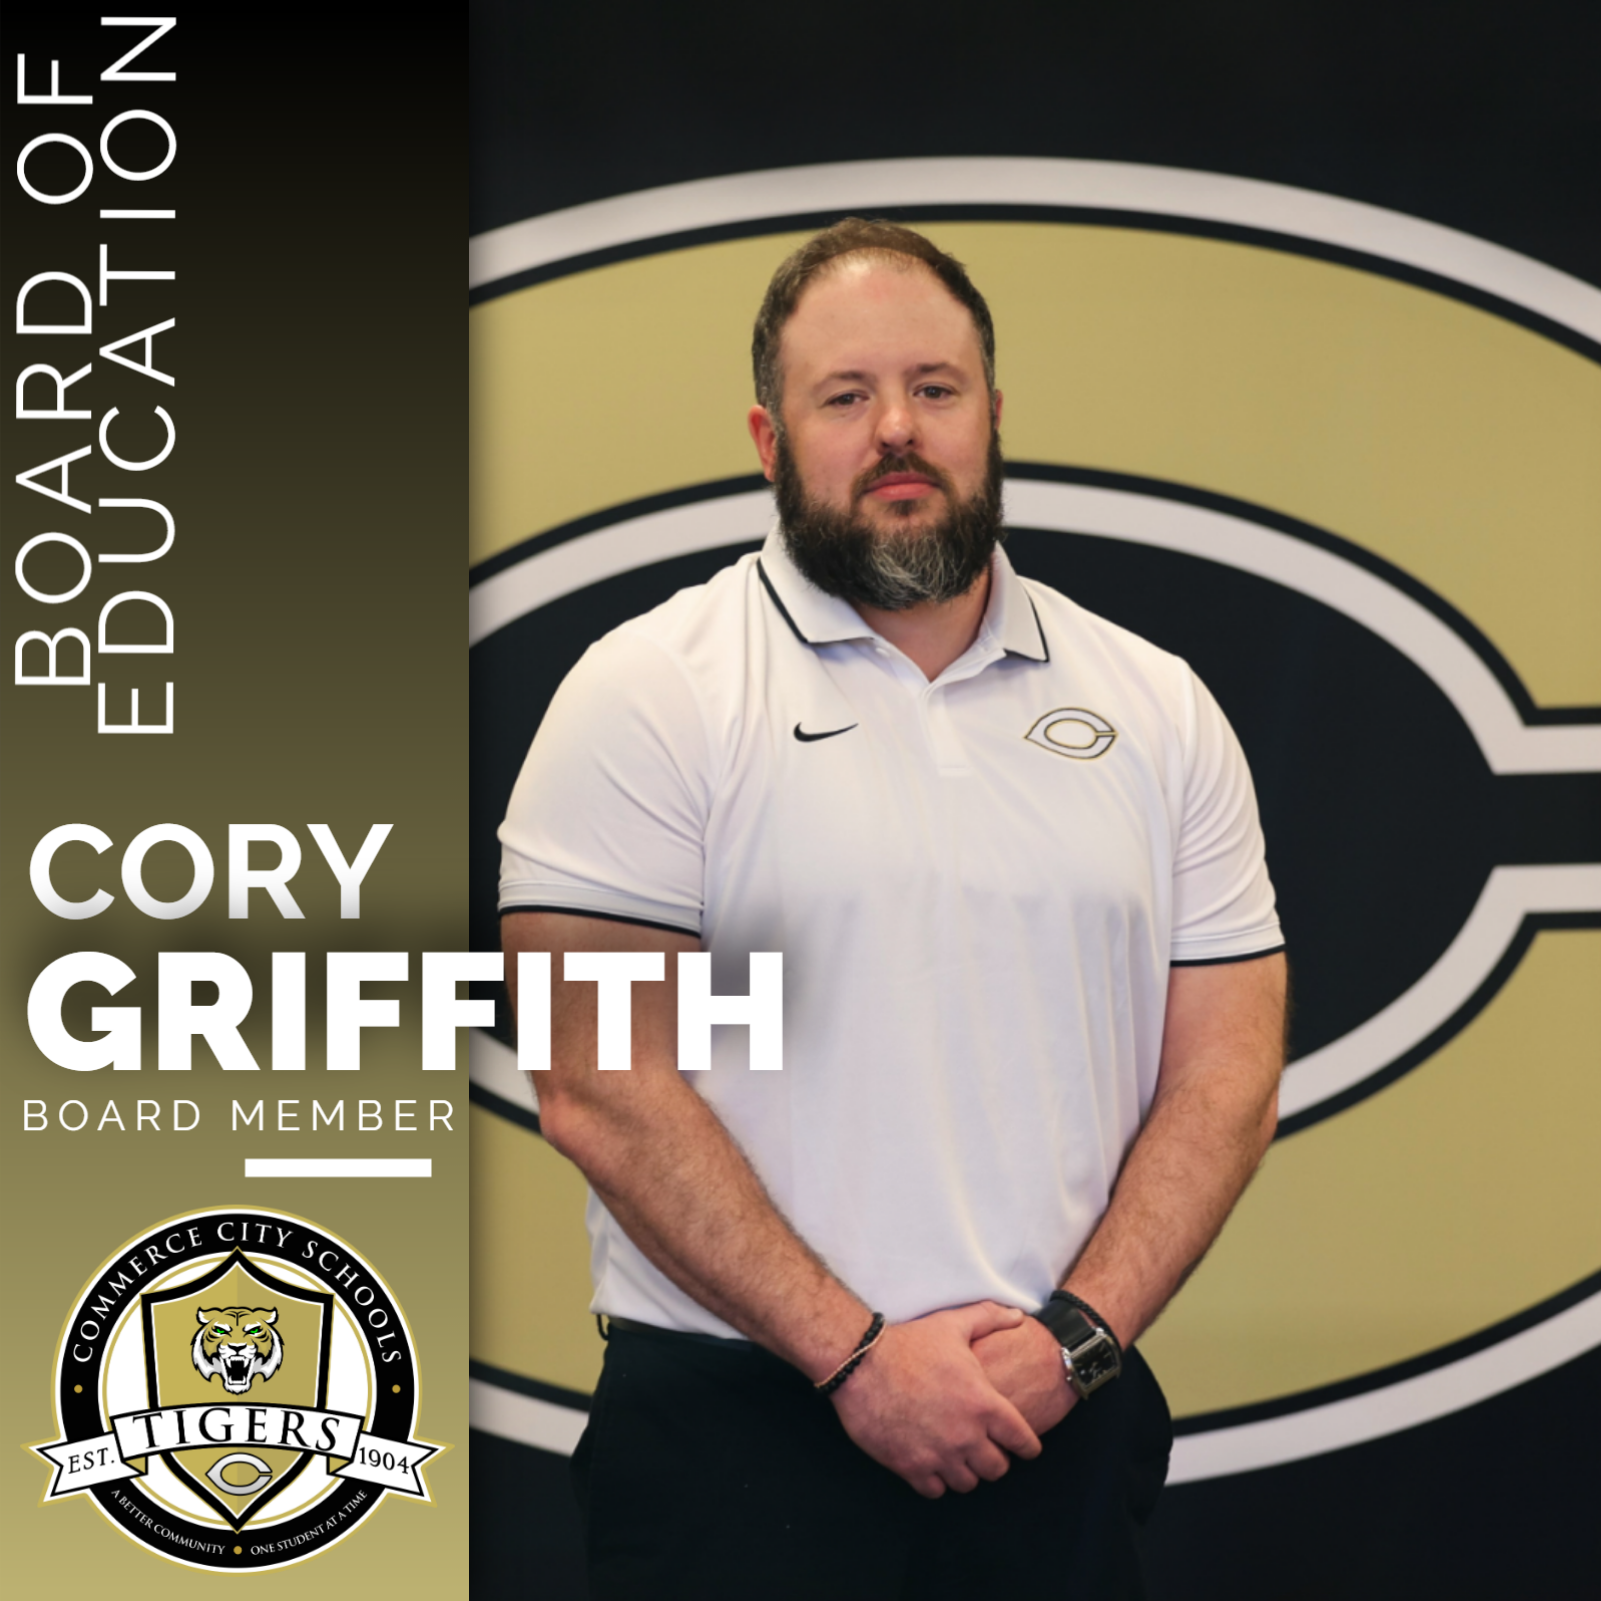 Member  Cory Griffith